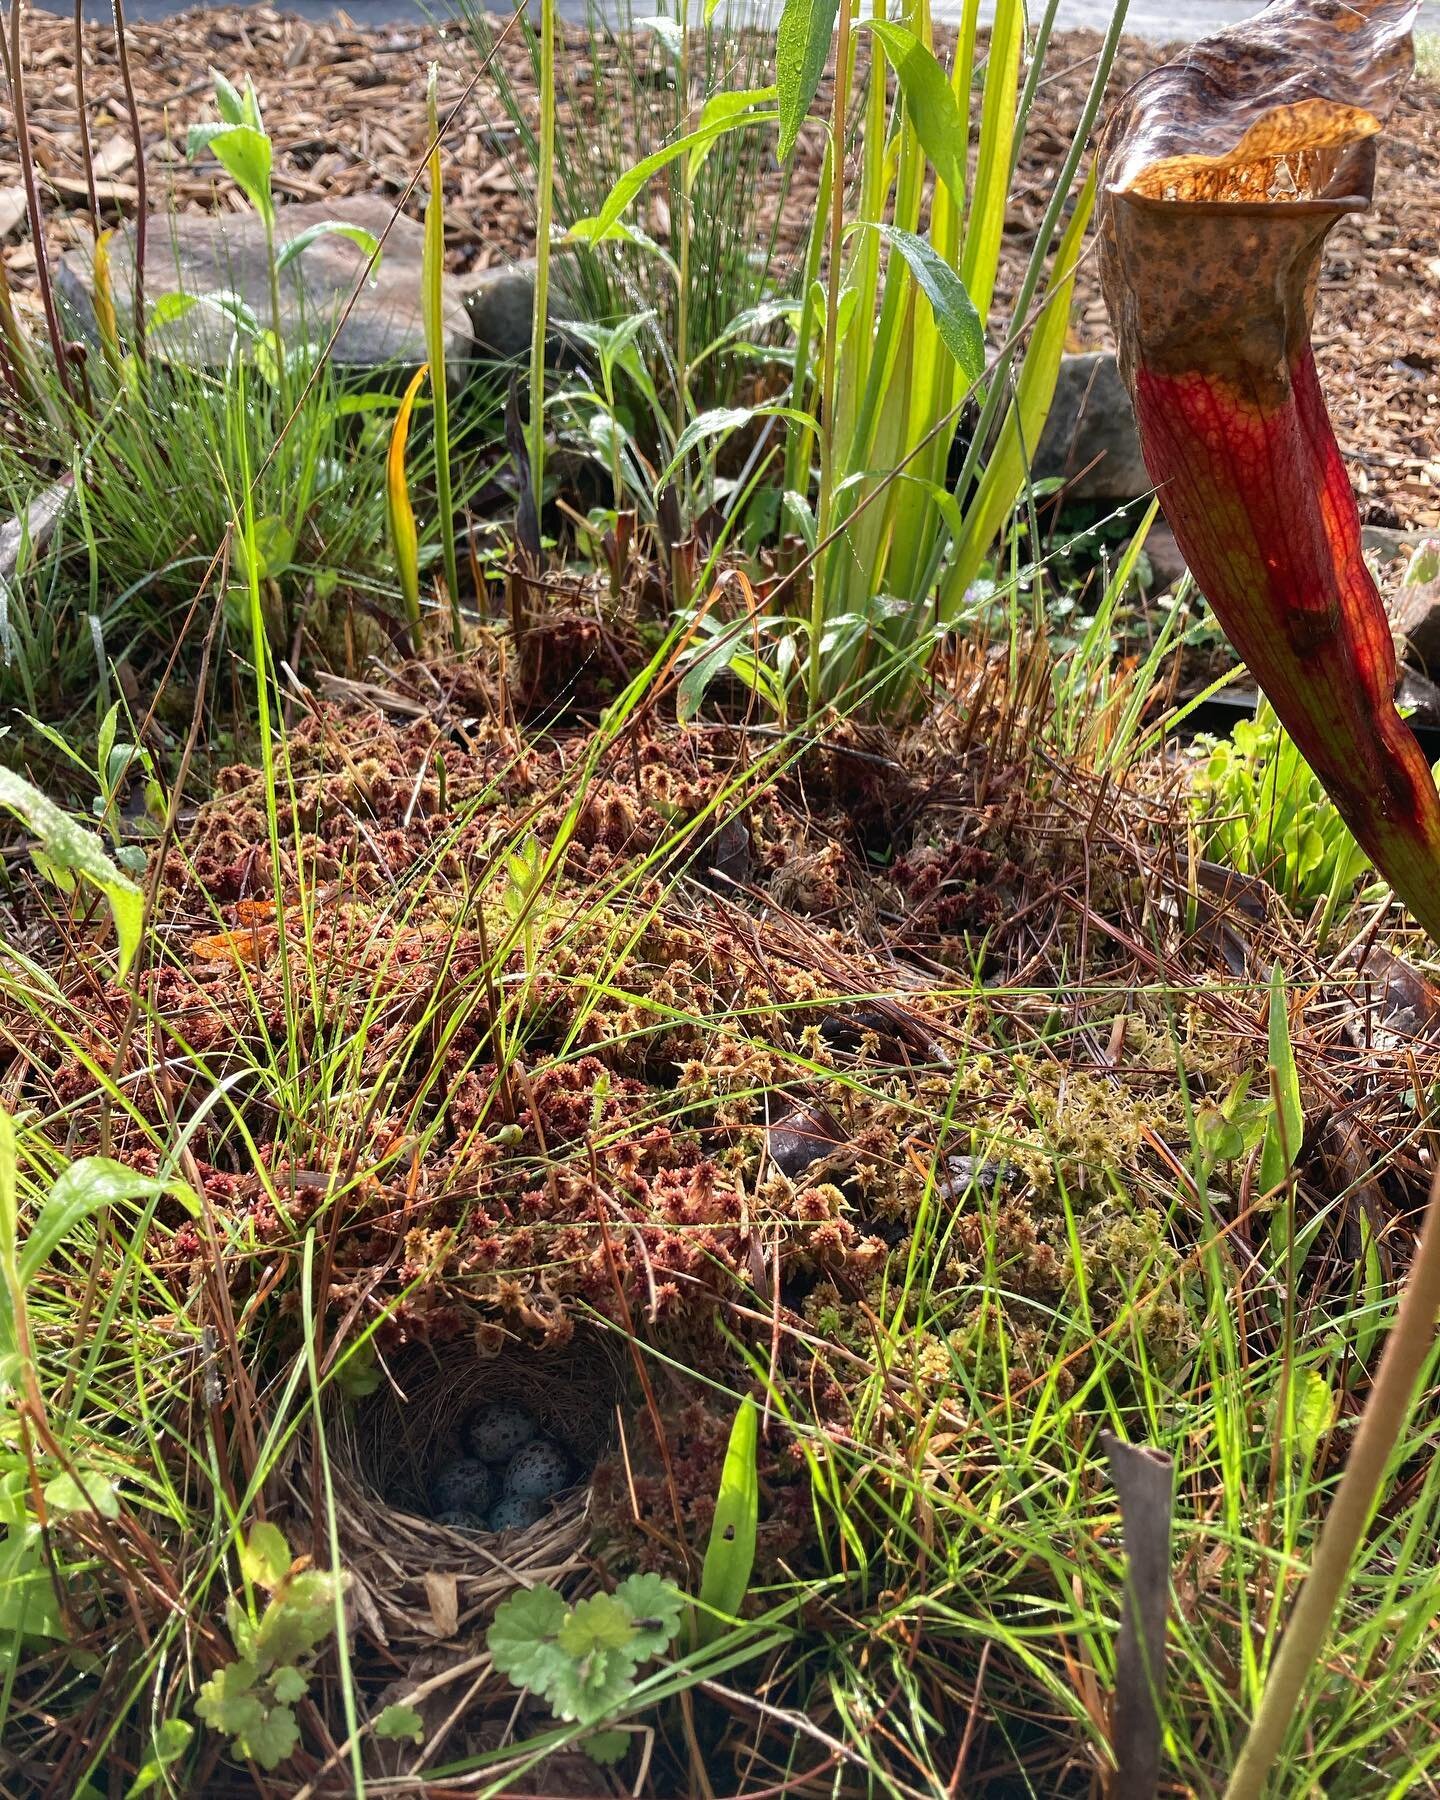 Nesting peace in our bog garden! 🐦 Please don&rsquo;t scare away the hard working momma bird. This is the first time seeing a bird nest among our pitcher plants! So fun! 

#boggarden #nativeplantnursery